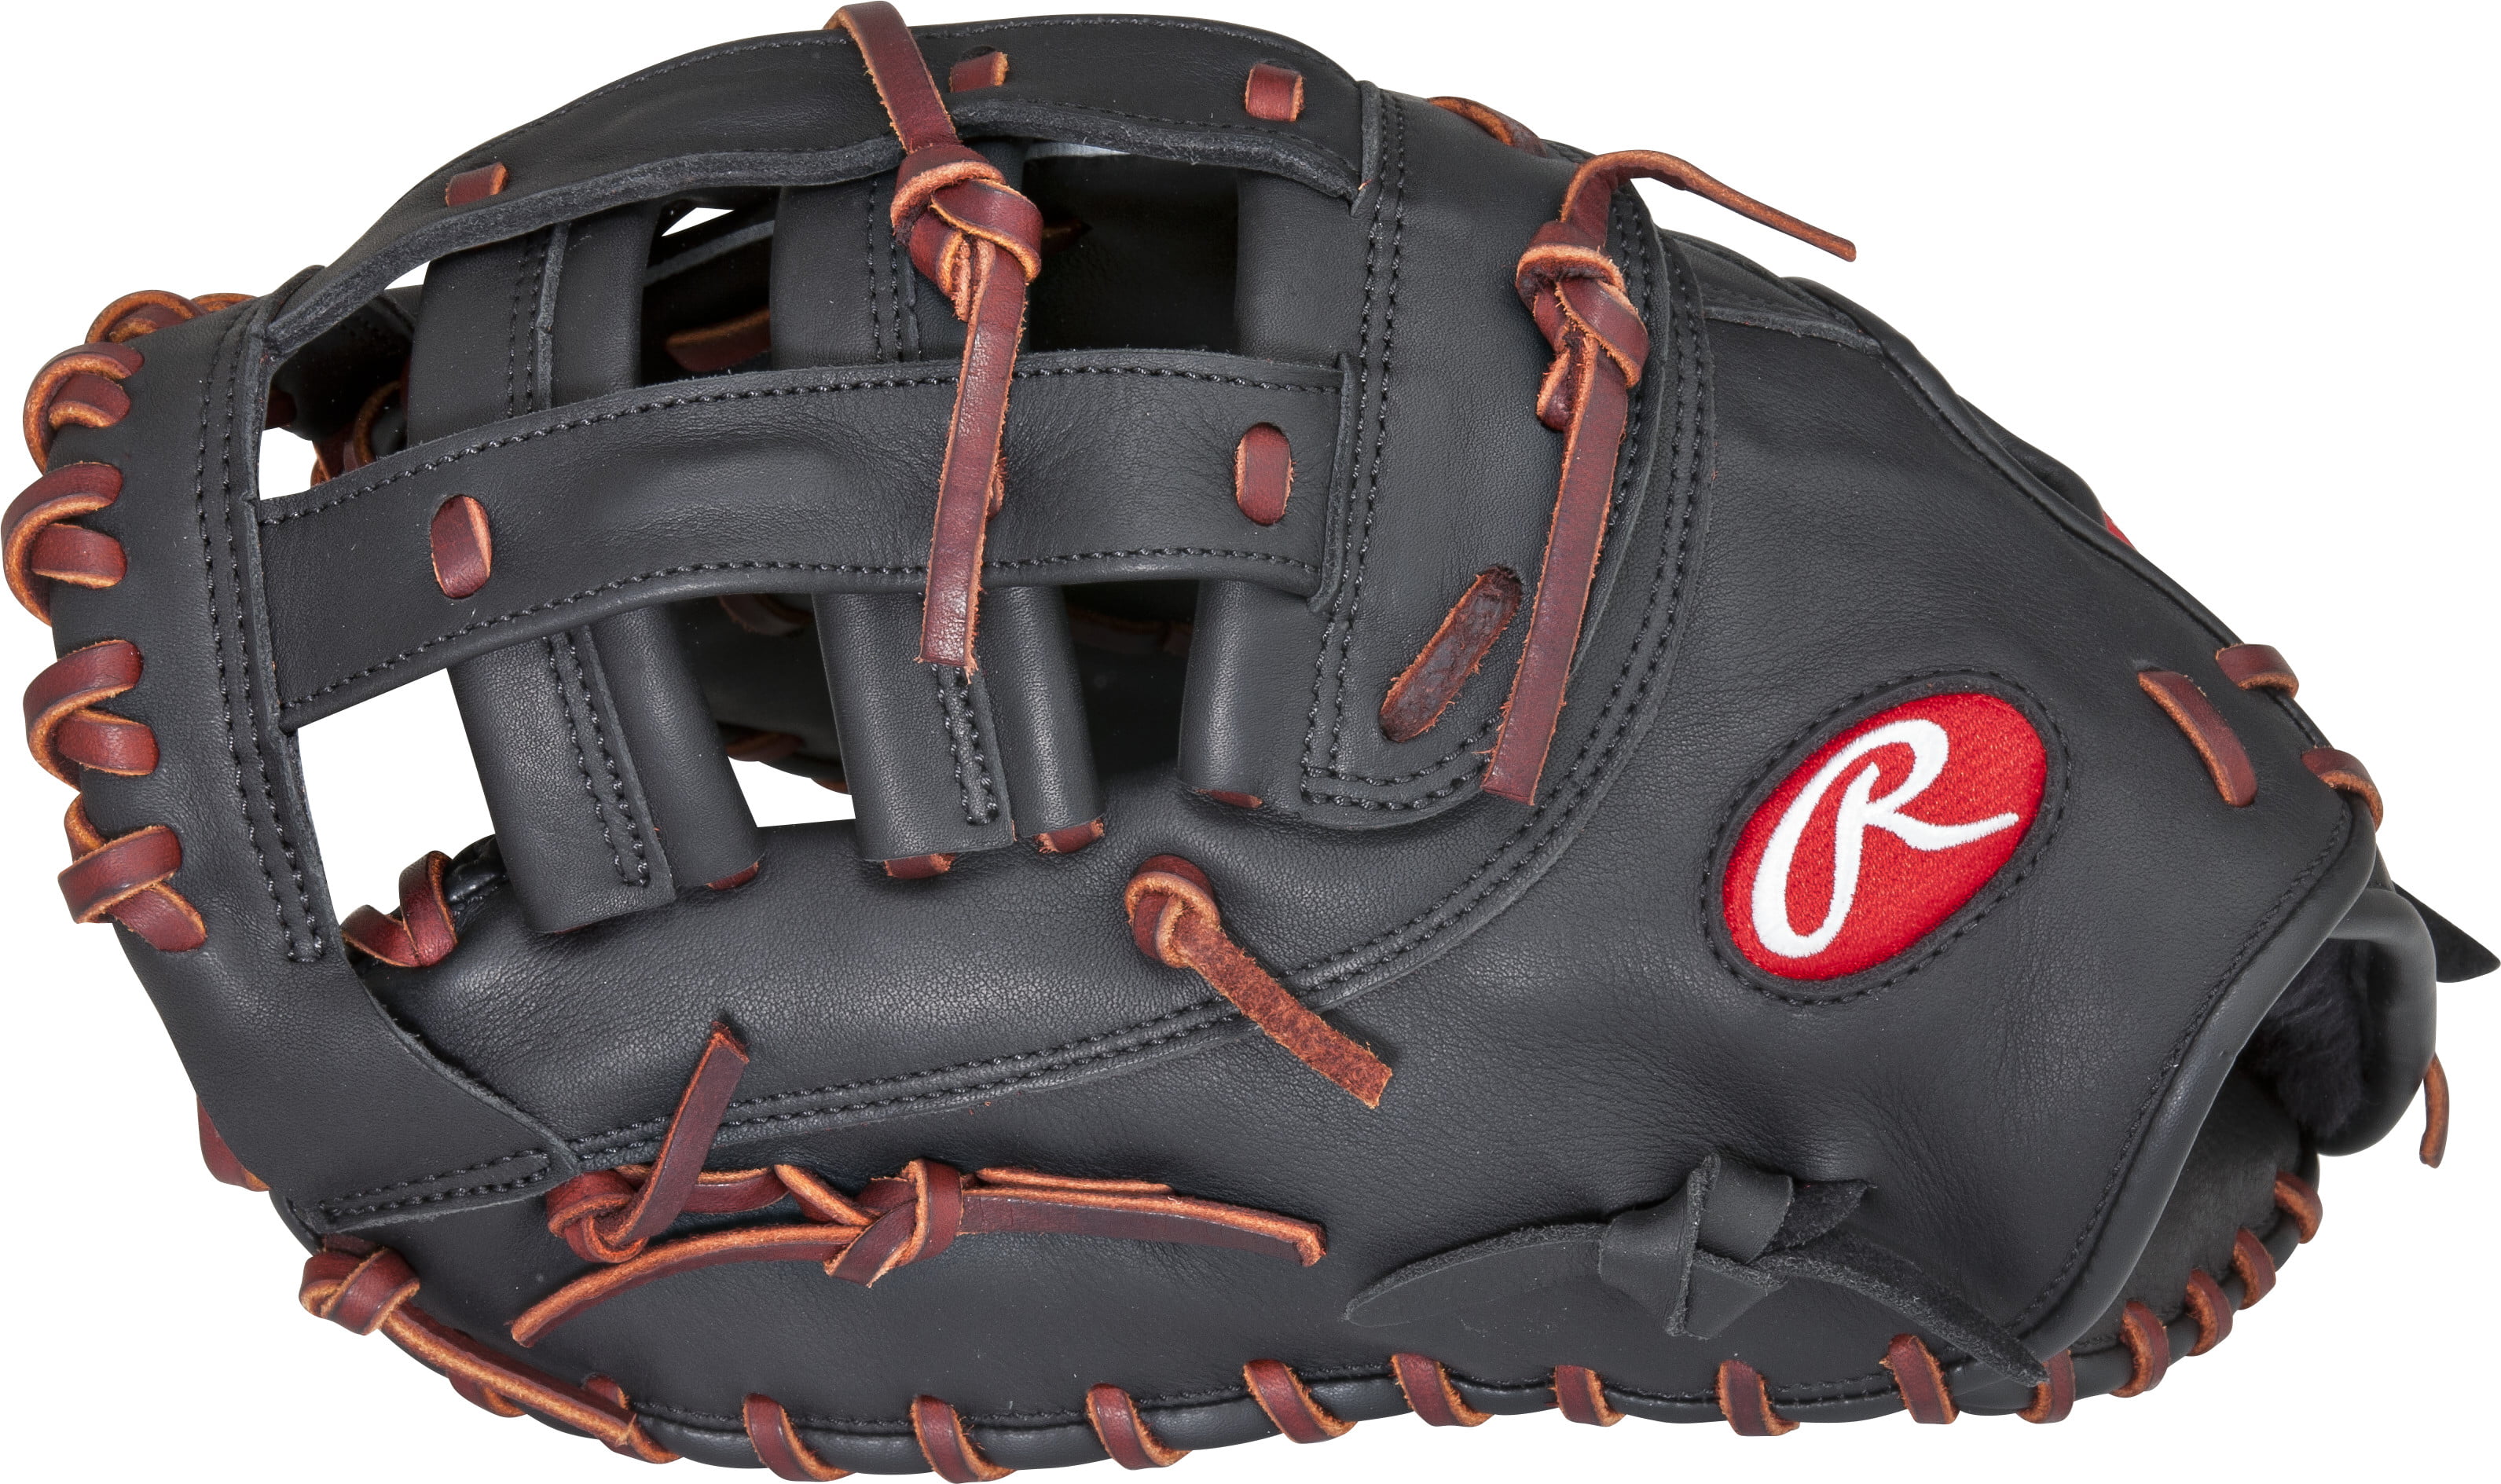 Louisville FPS1276 TPS Select Fastpitch Series 12.75 Inch Fast Pitch Softball Glove One Color Left Hand Throw